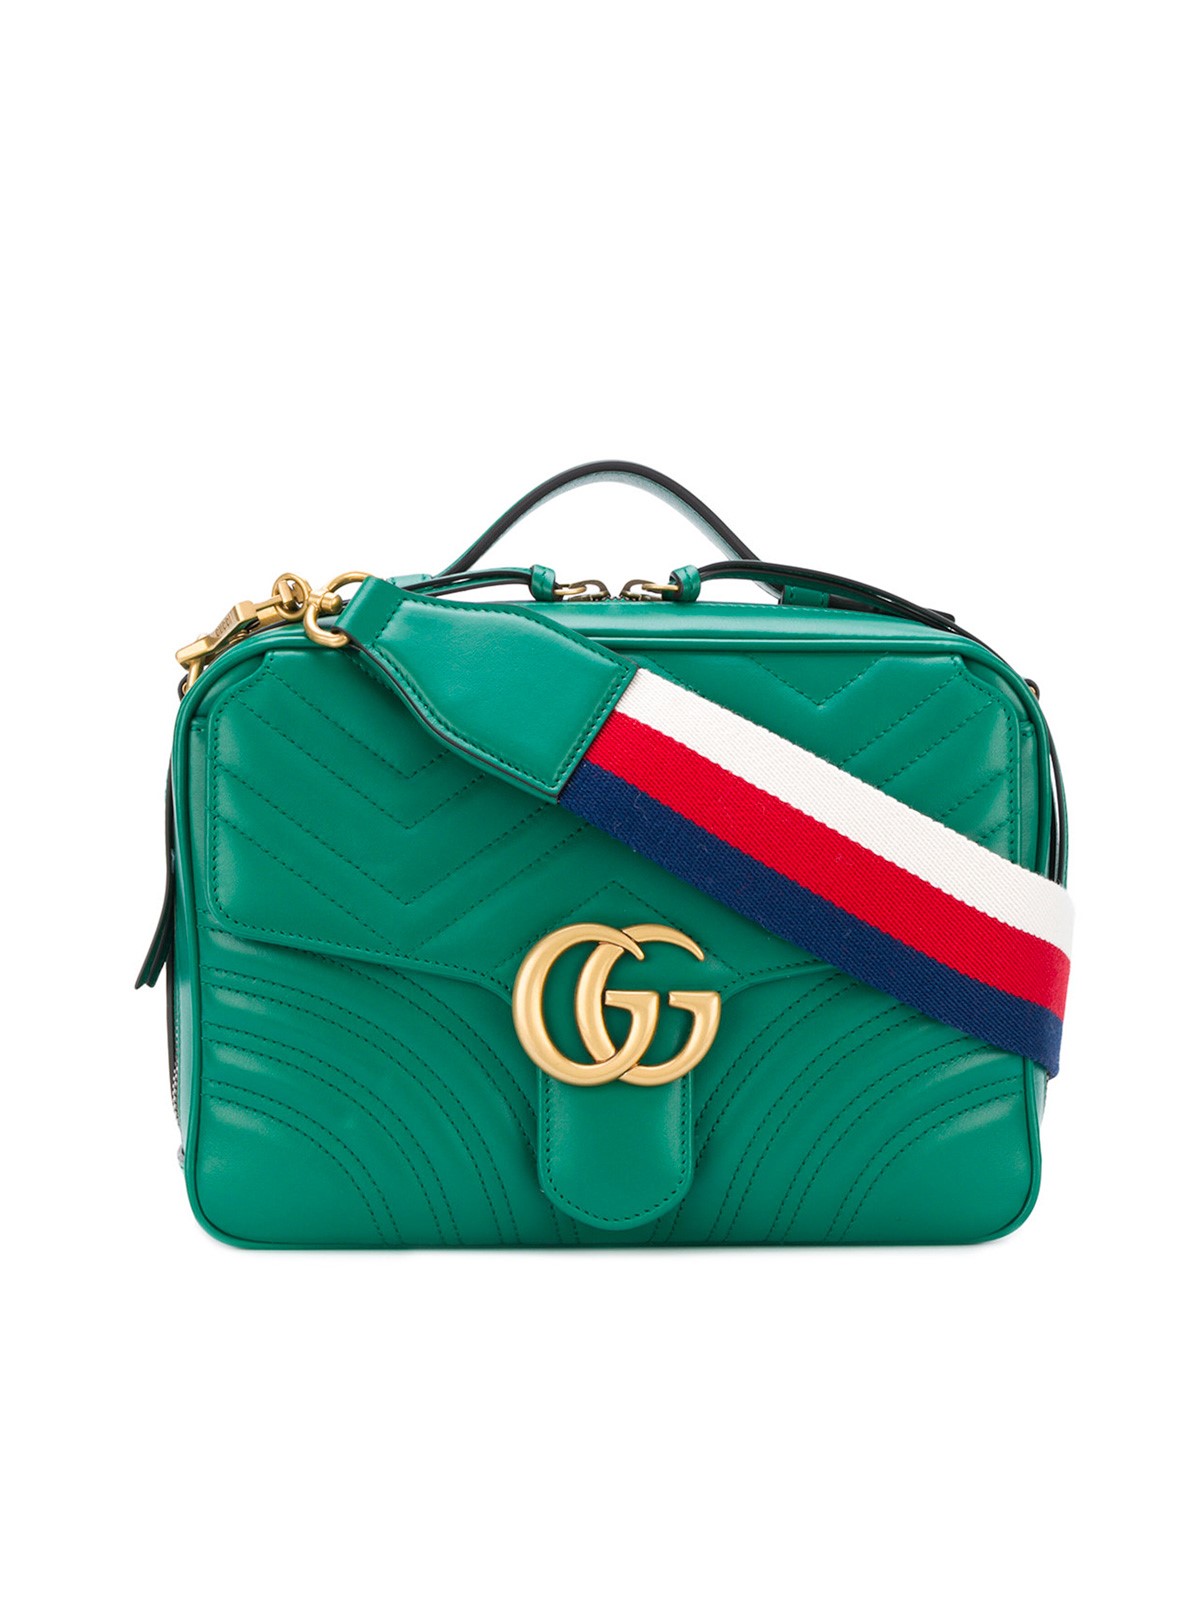 gucci GG MARMONT SHOULDER BAG available on nrd.kbic-nsn.gov - 21477